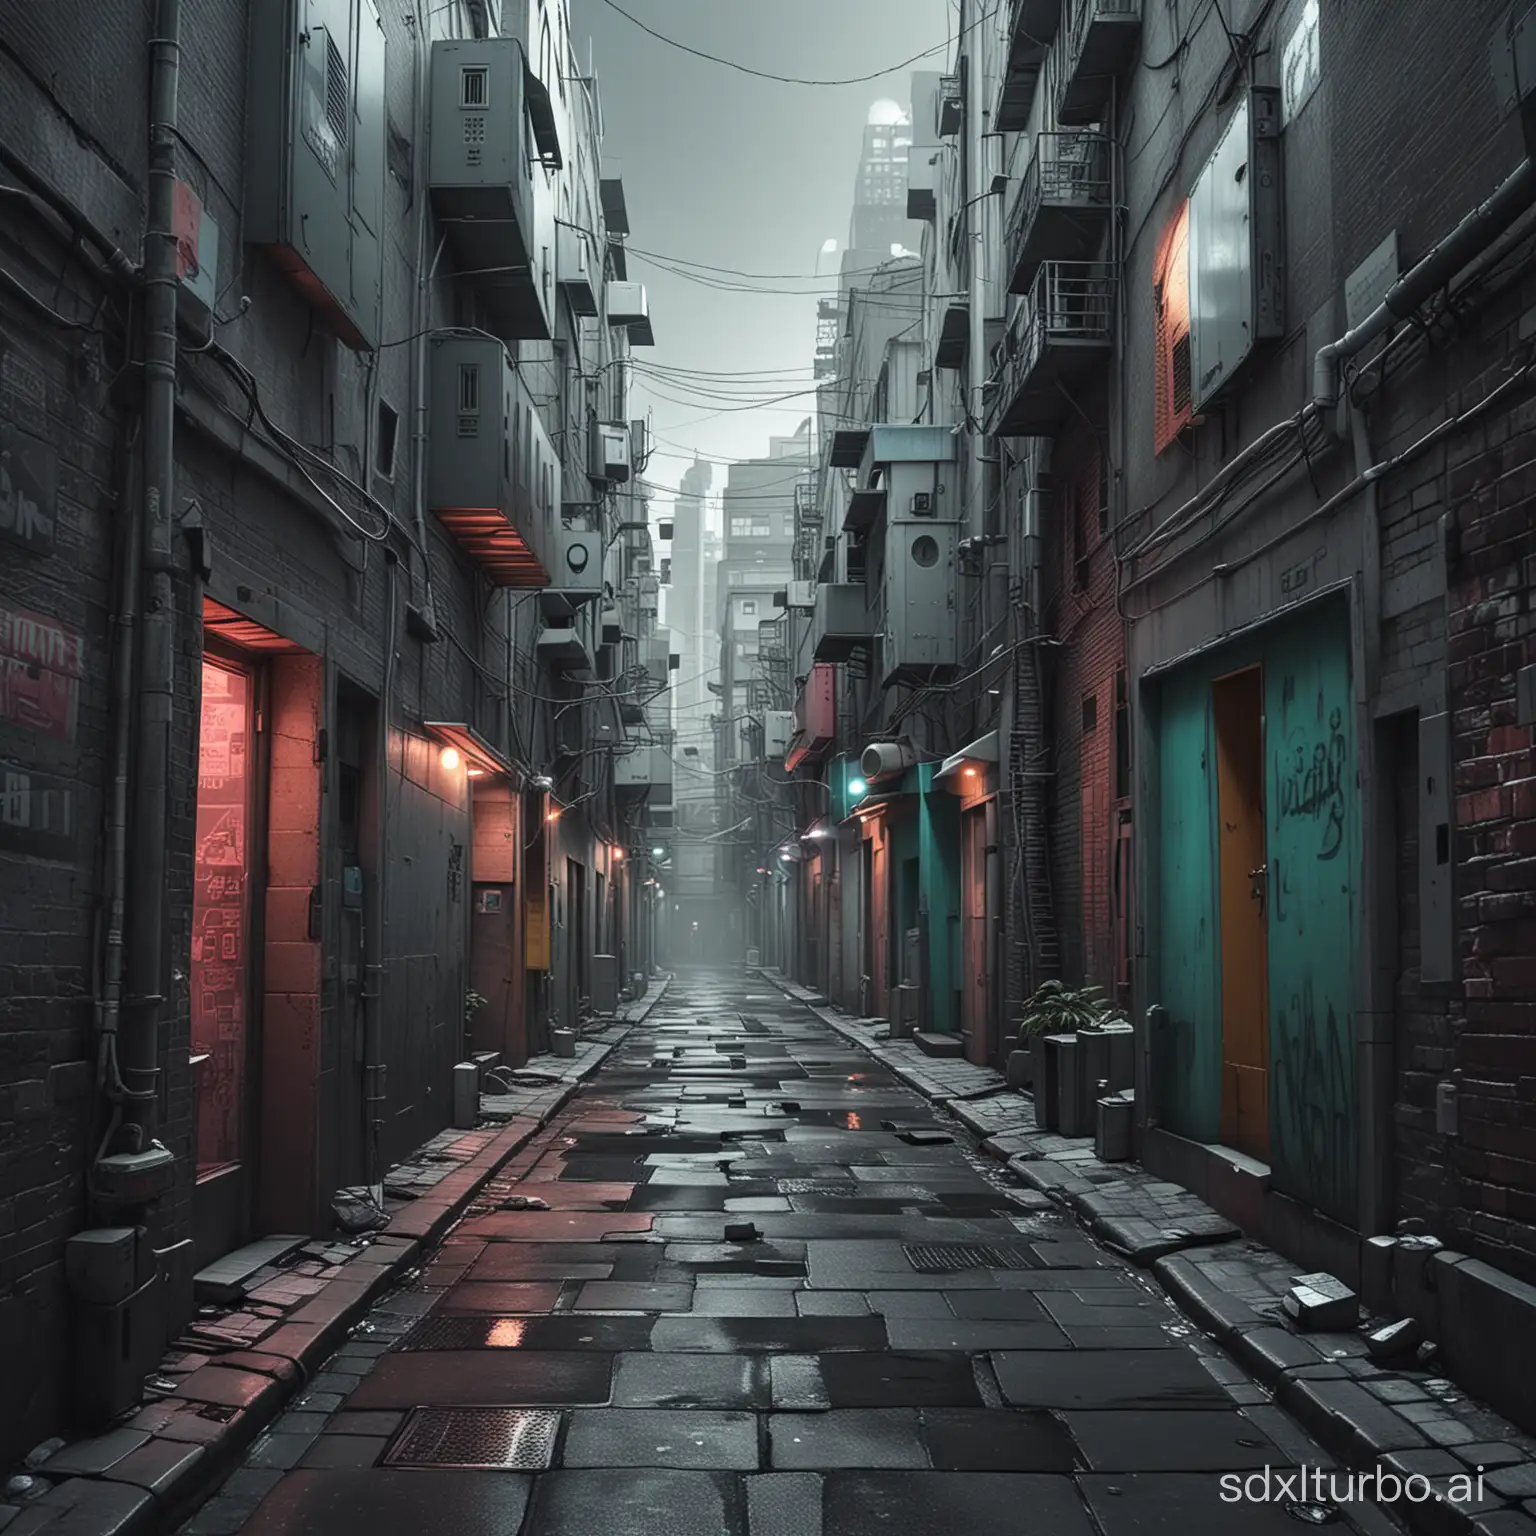 The old retro alley is gradually covered up by the Cyber-style architecture. Everyone is as small as an ant. The composition of surrealism and realism is from the top to bottom. The tone is retro gray and bright fluorescent color to form a high contrast, and the background is full of noisy streets.